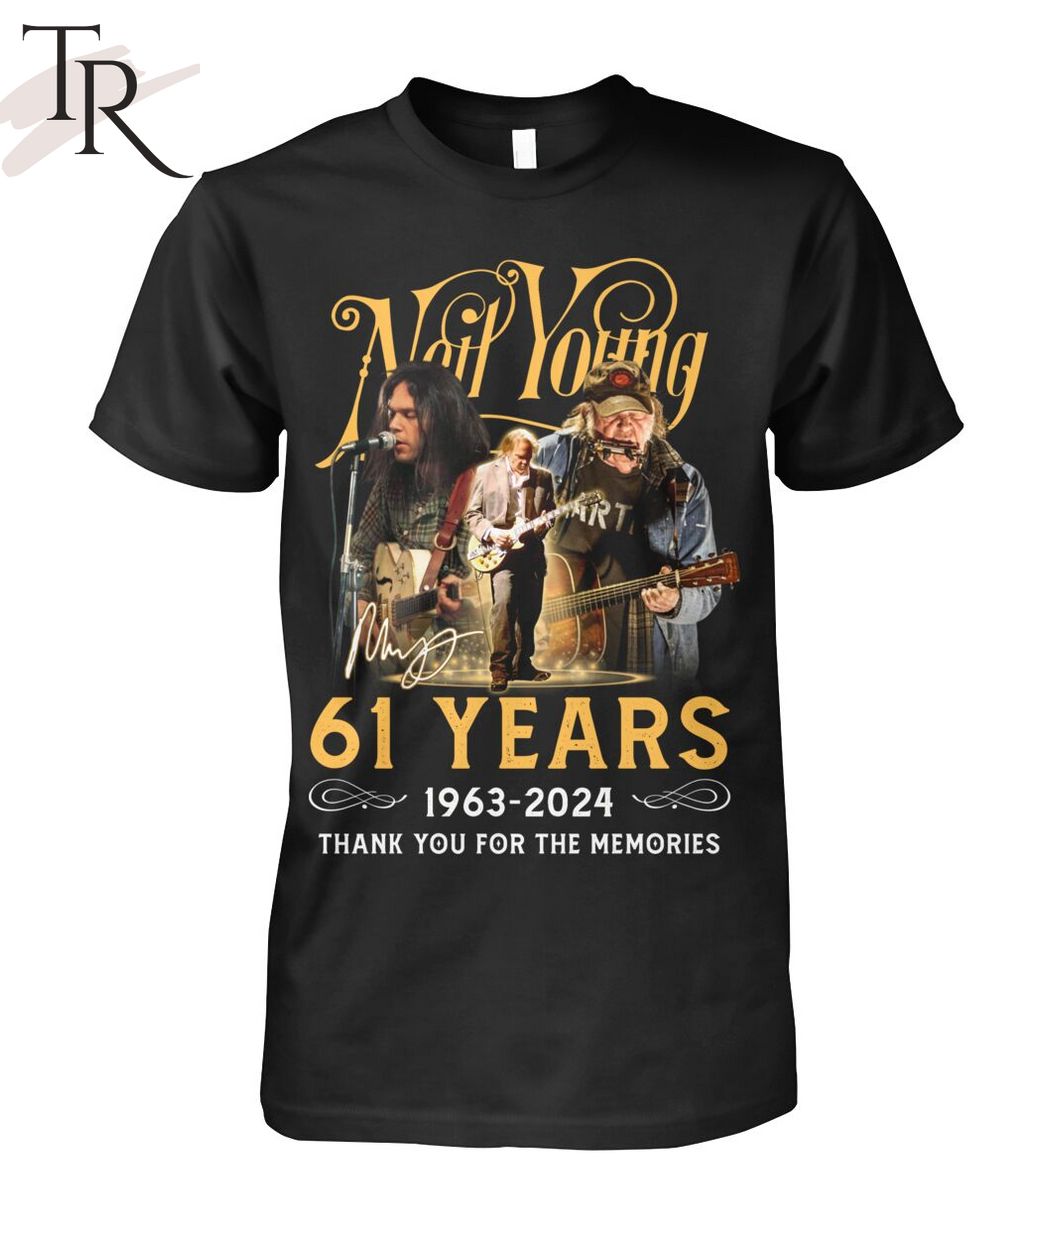 Neil Young 61 Years 1963-2024 Thank You For The Memories T-Shirt